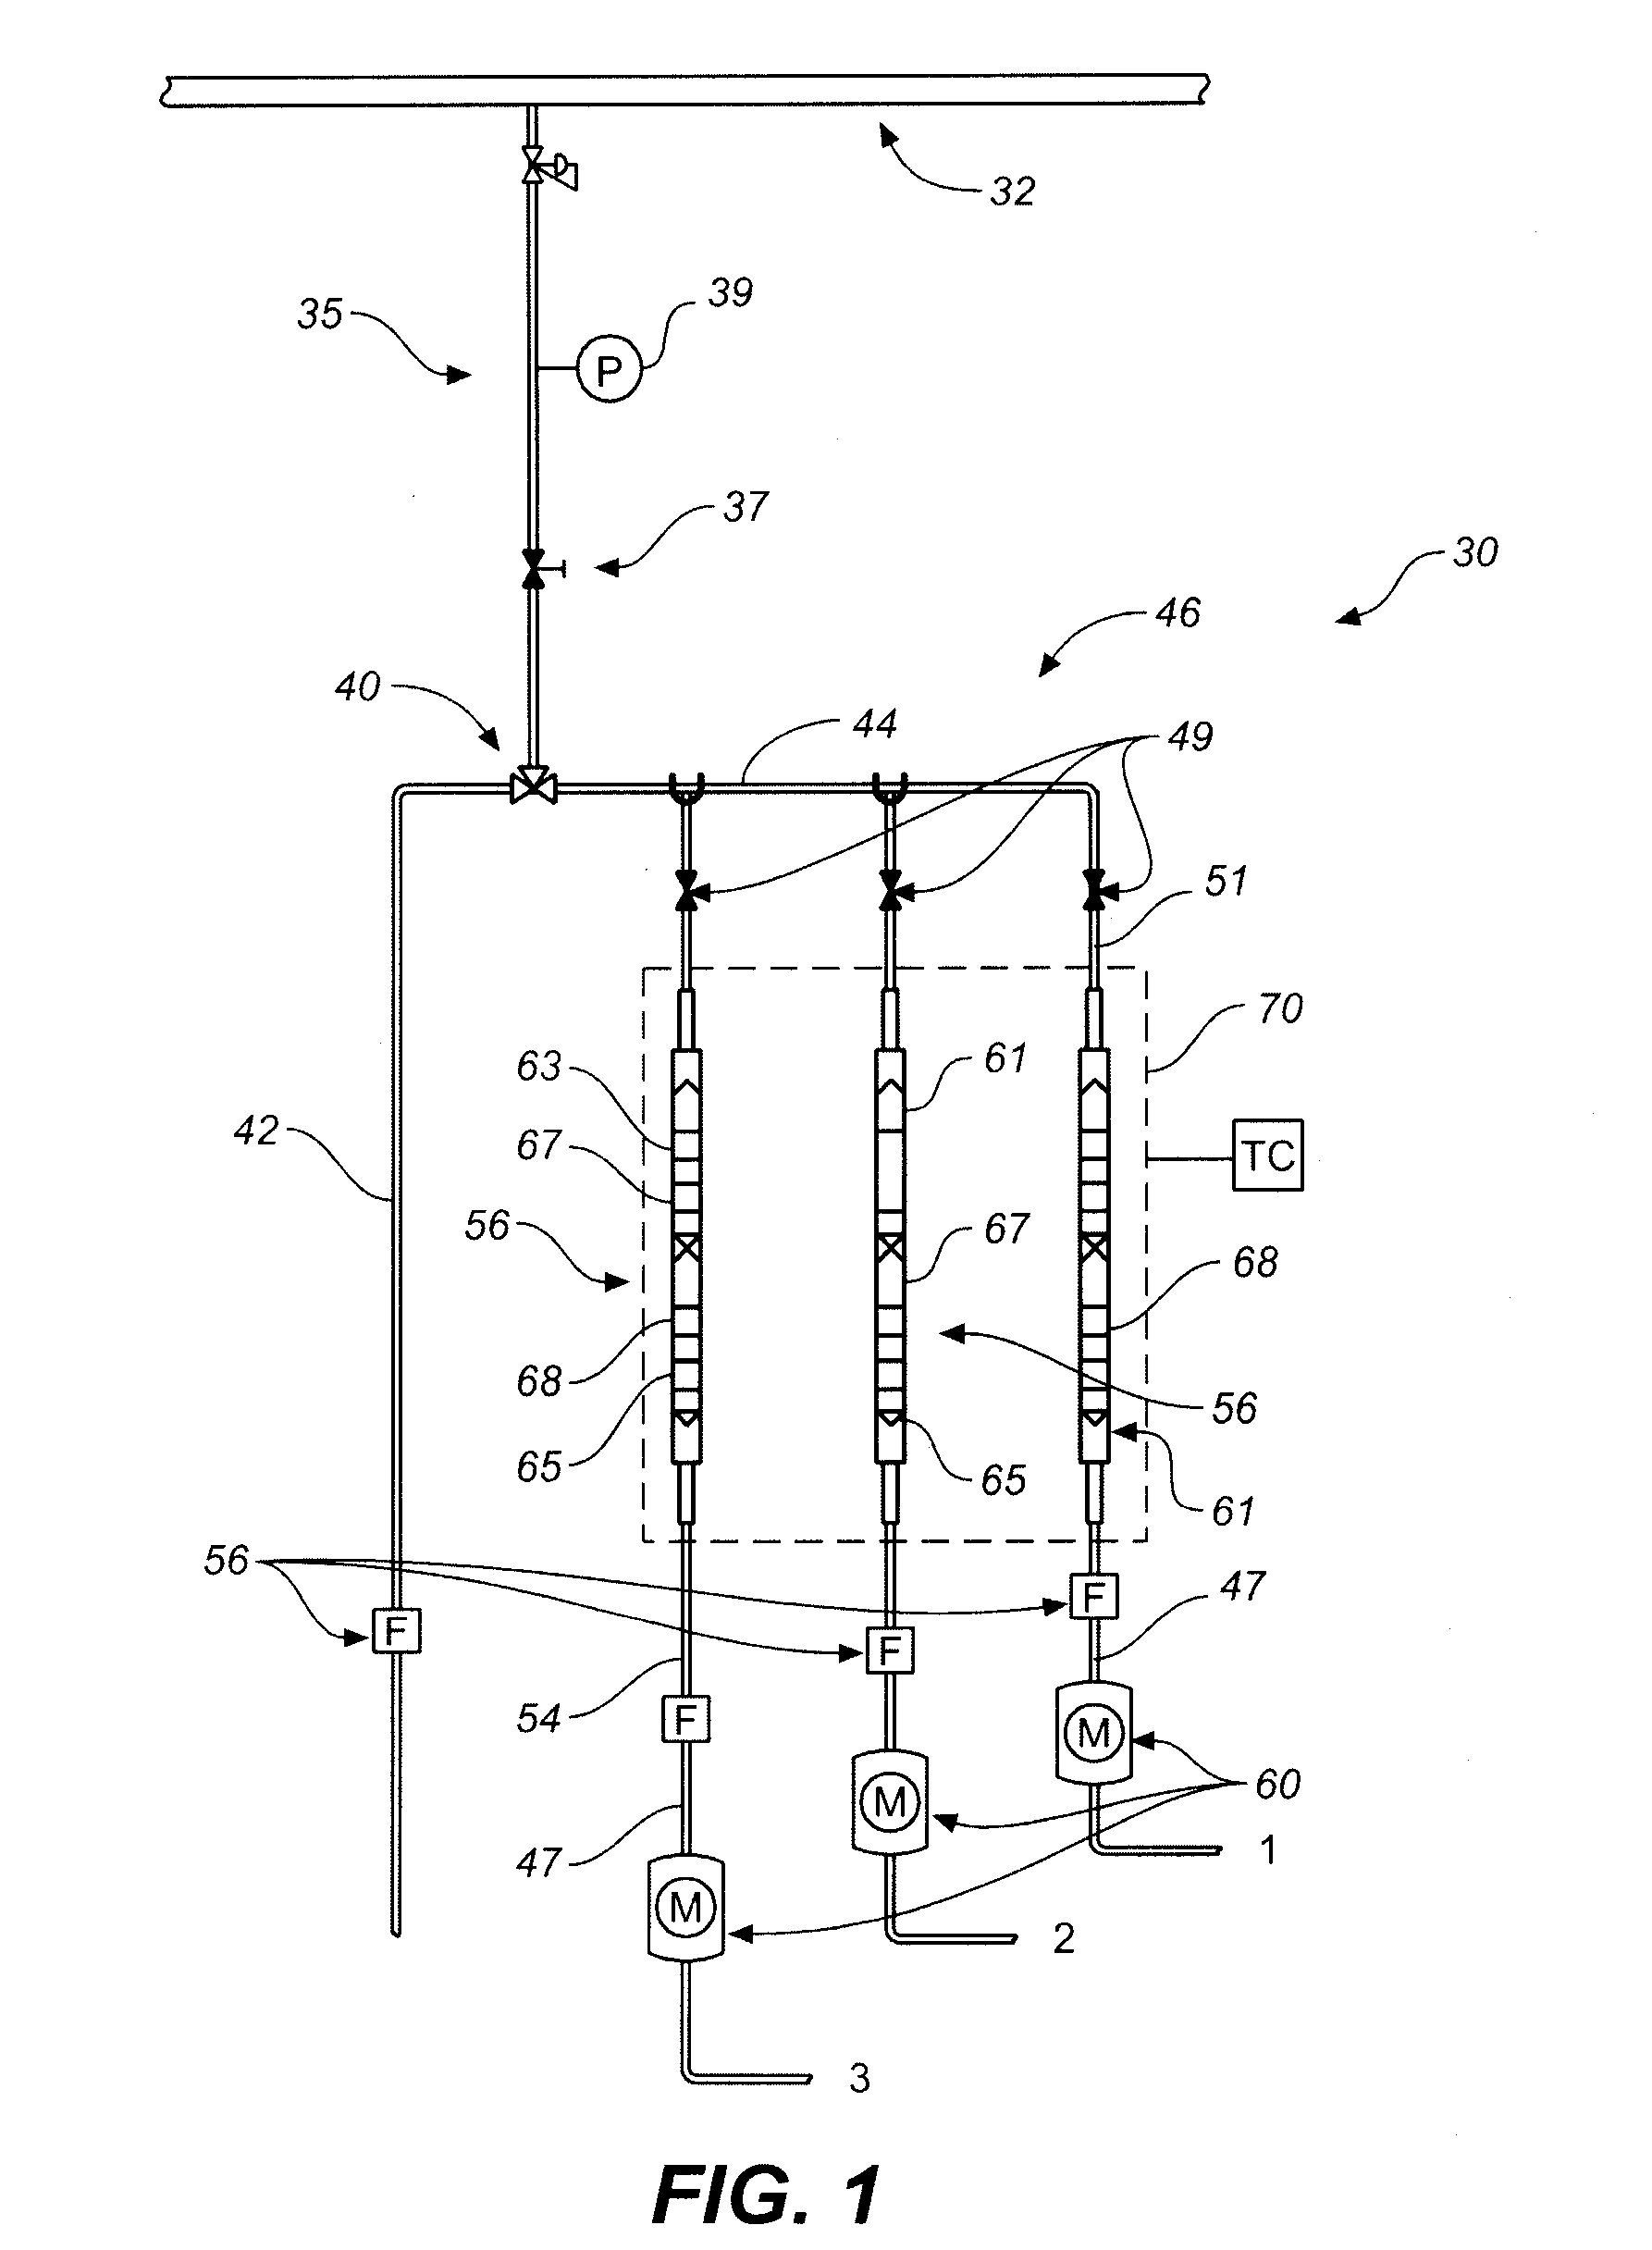 Sampling apparatus for constituents in natural gas lines